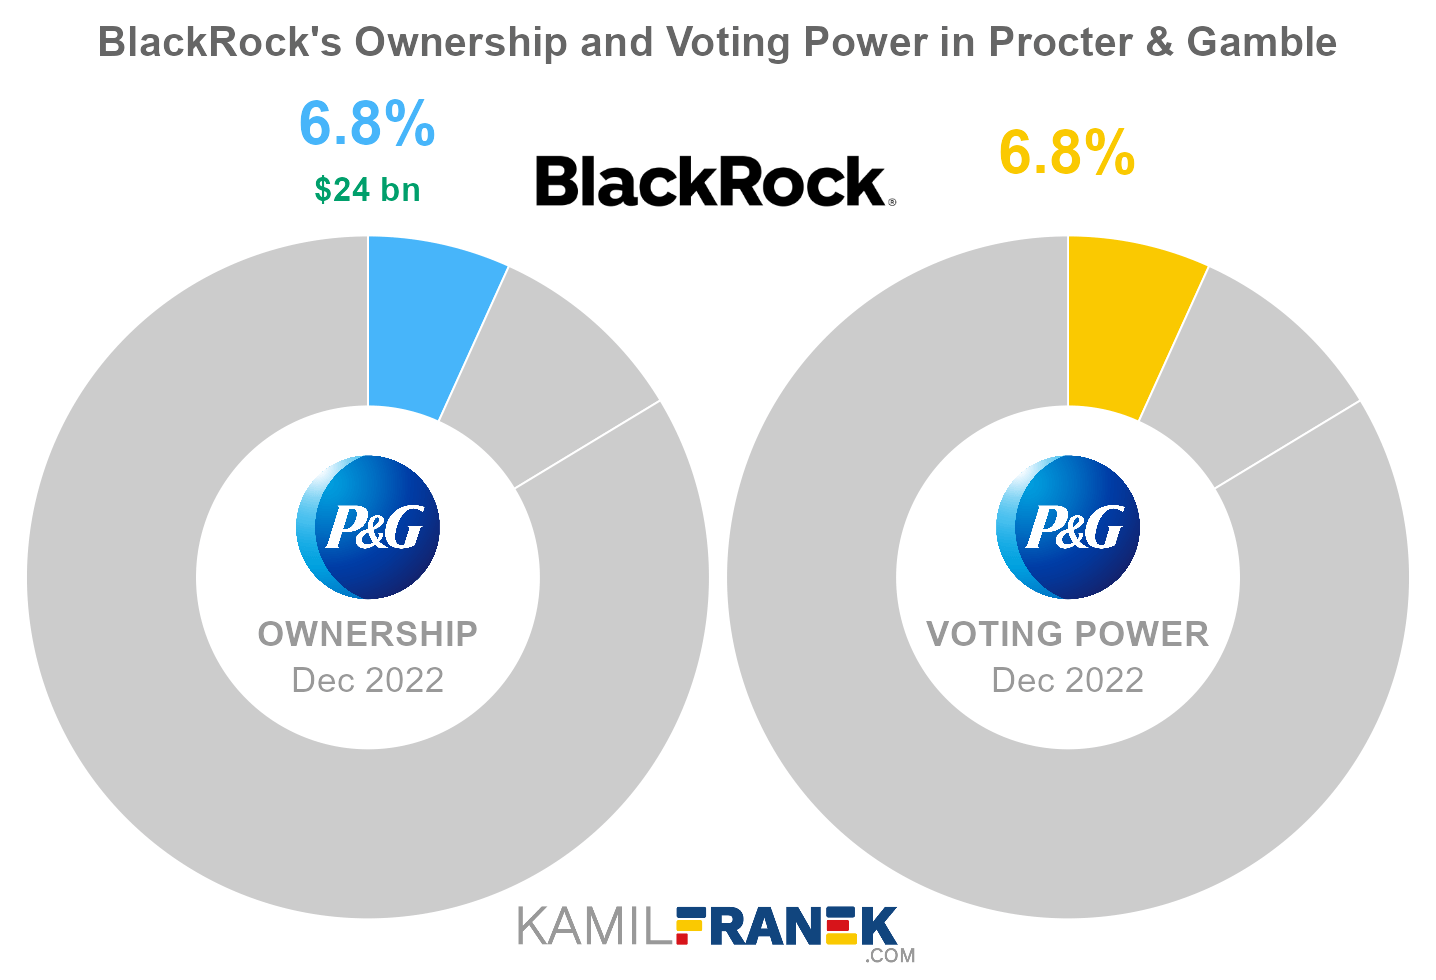 BlackRock's share ownership and voting power in Procter & Gamble (chart)